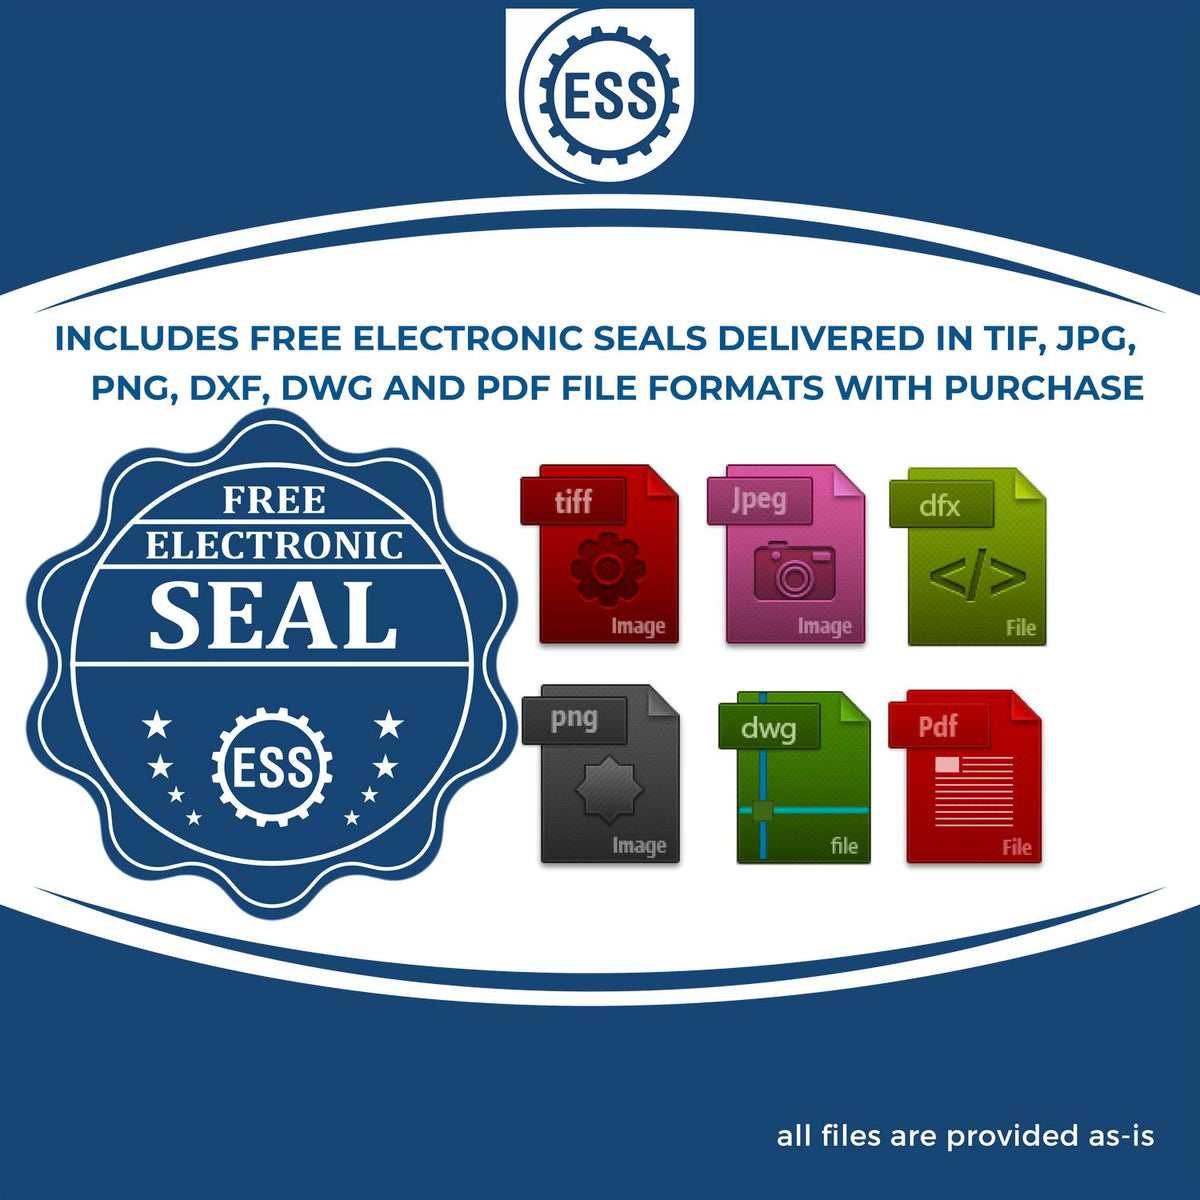 An infographic for the free electronic seal for the State of Ohio Extended Long Reach Engineer Seal illustrating the different file type icons such as DXF, DWG, TIF, JPG and PNG.